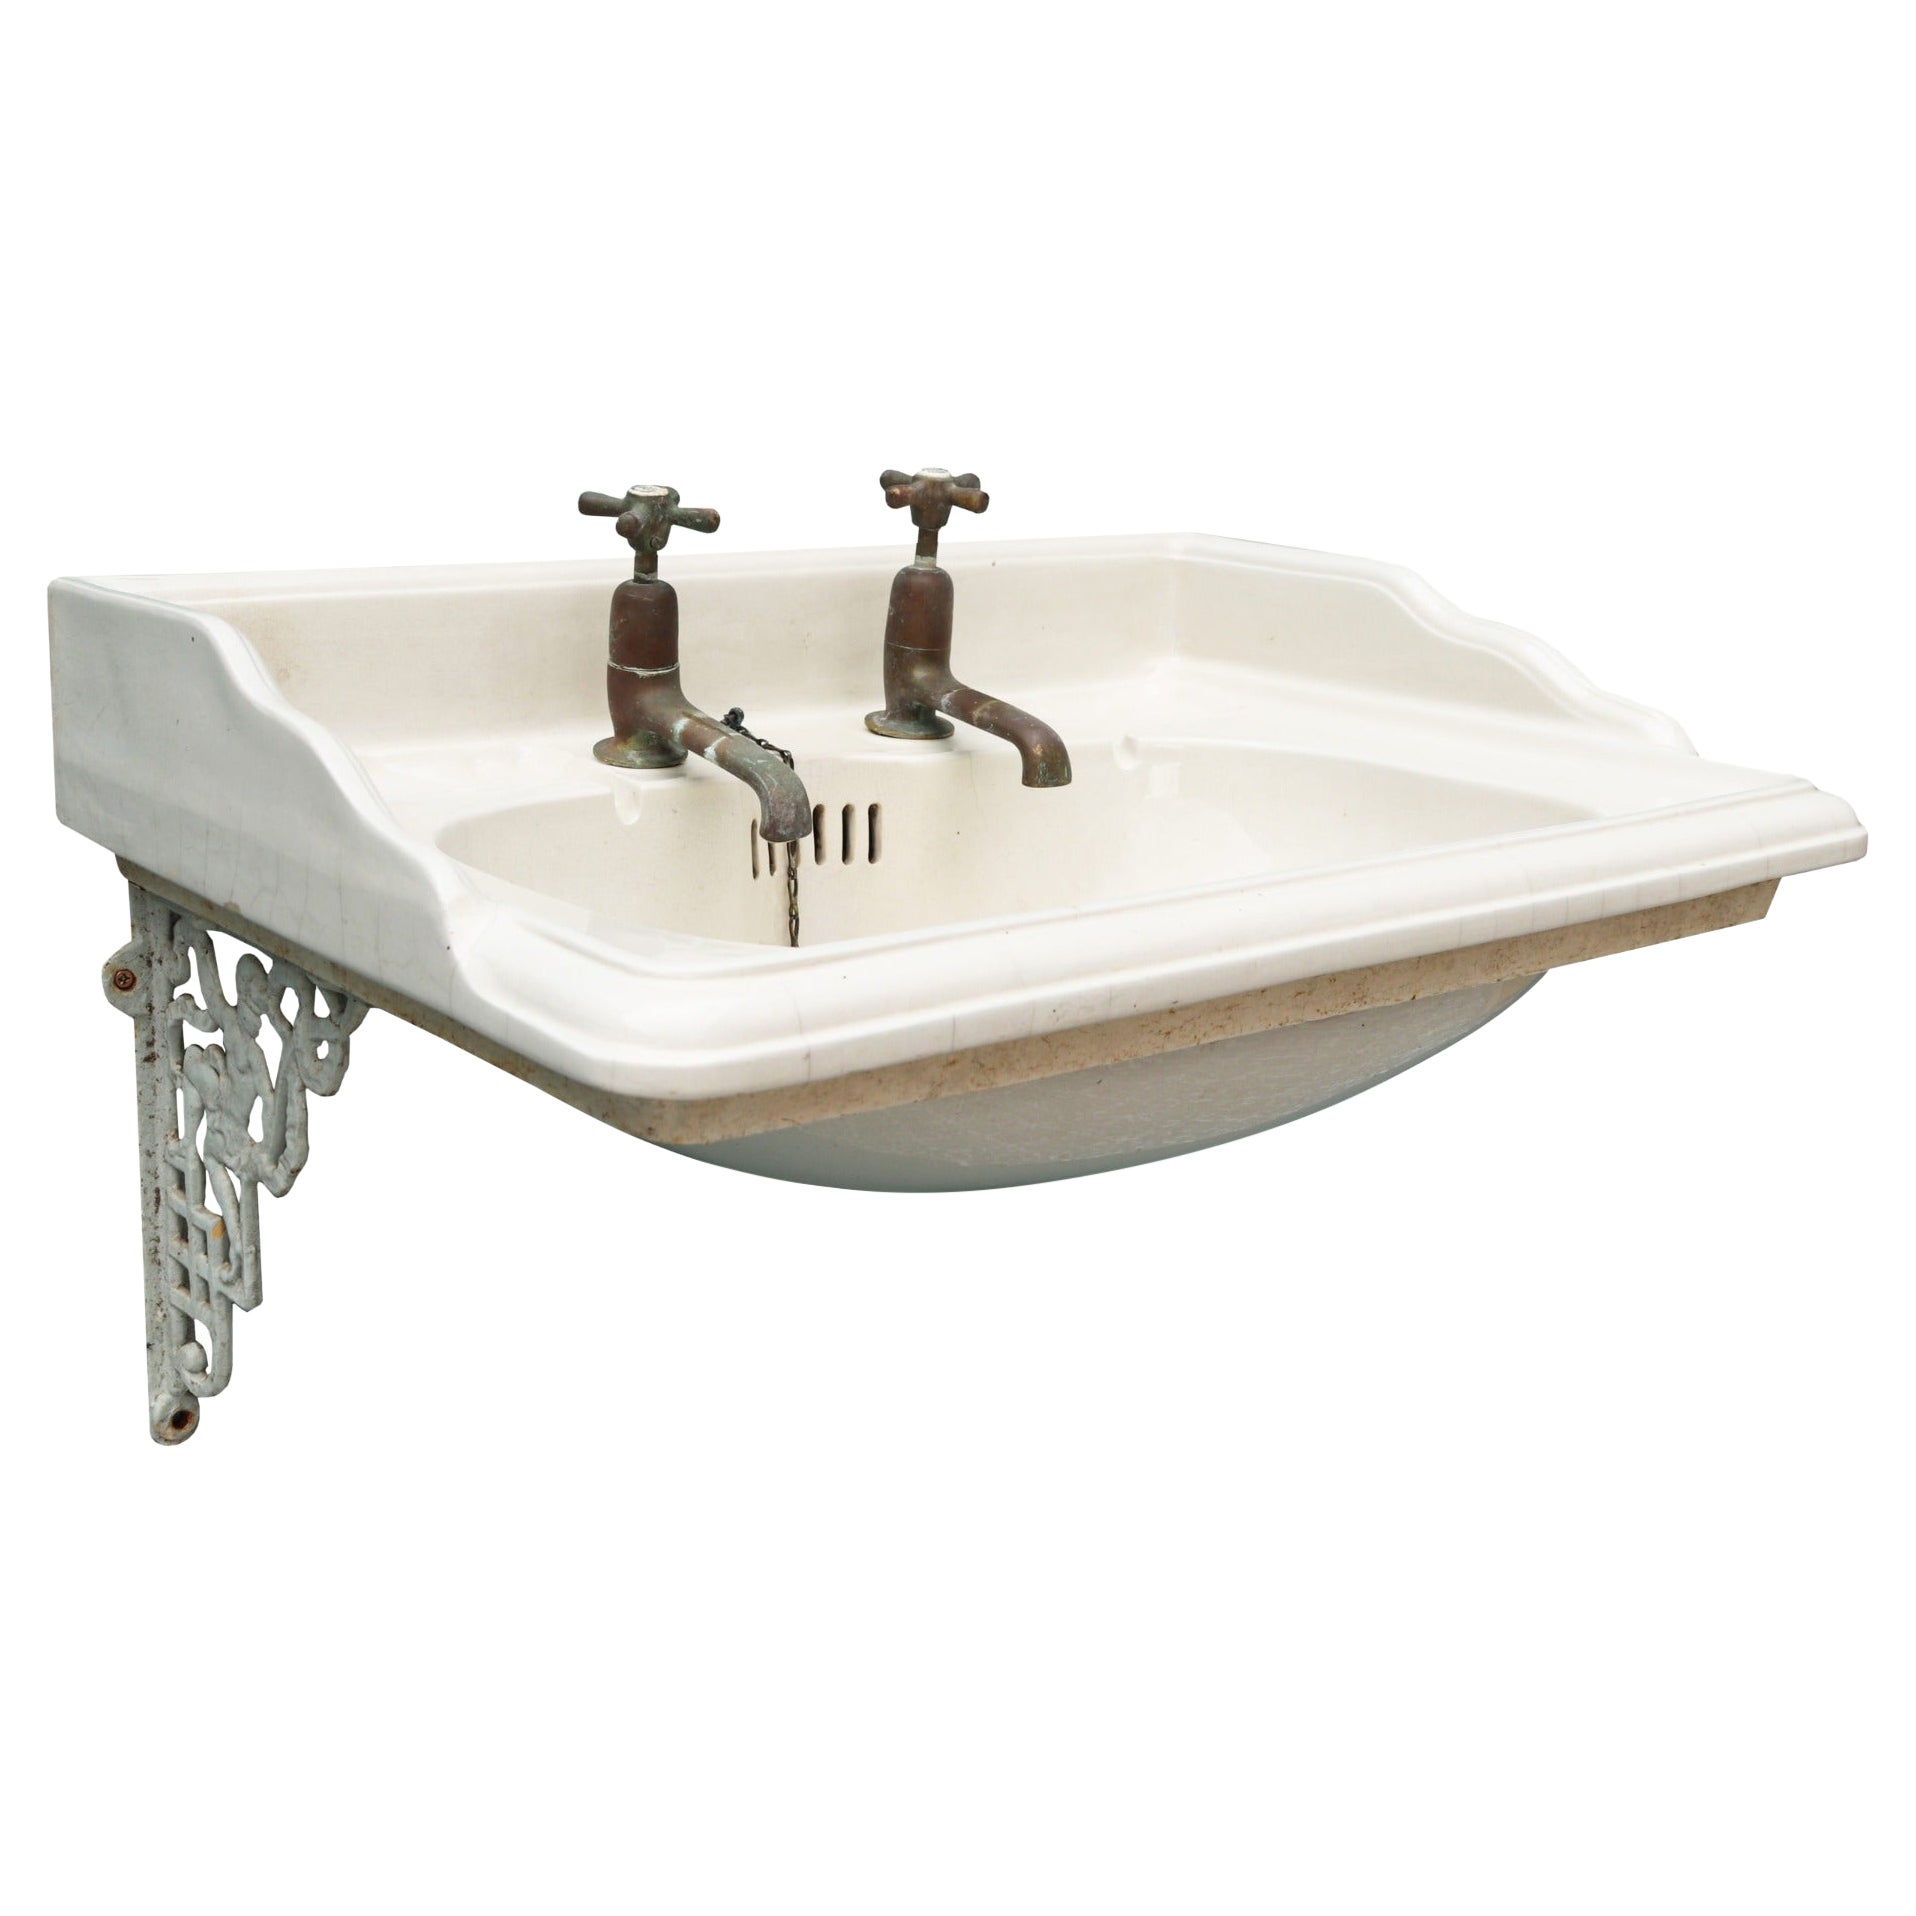 Antique Wall Mounted Wash Basin For Sale